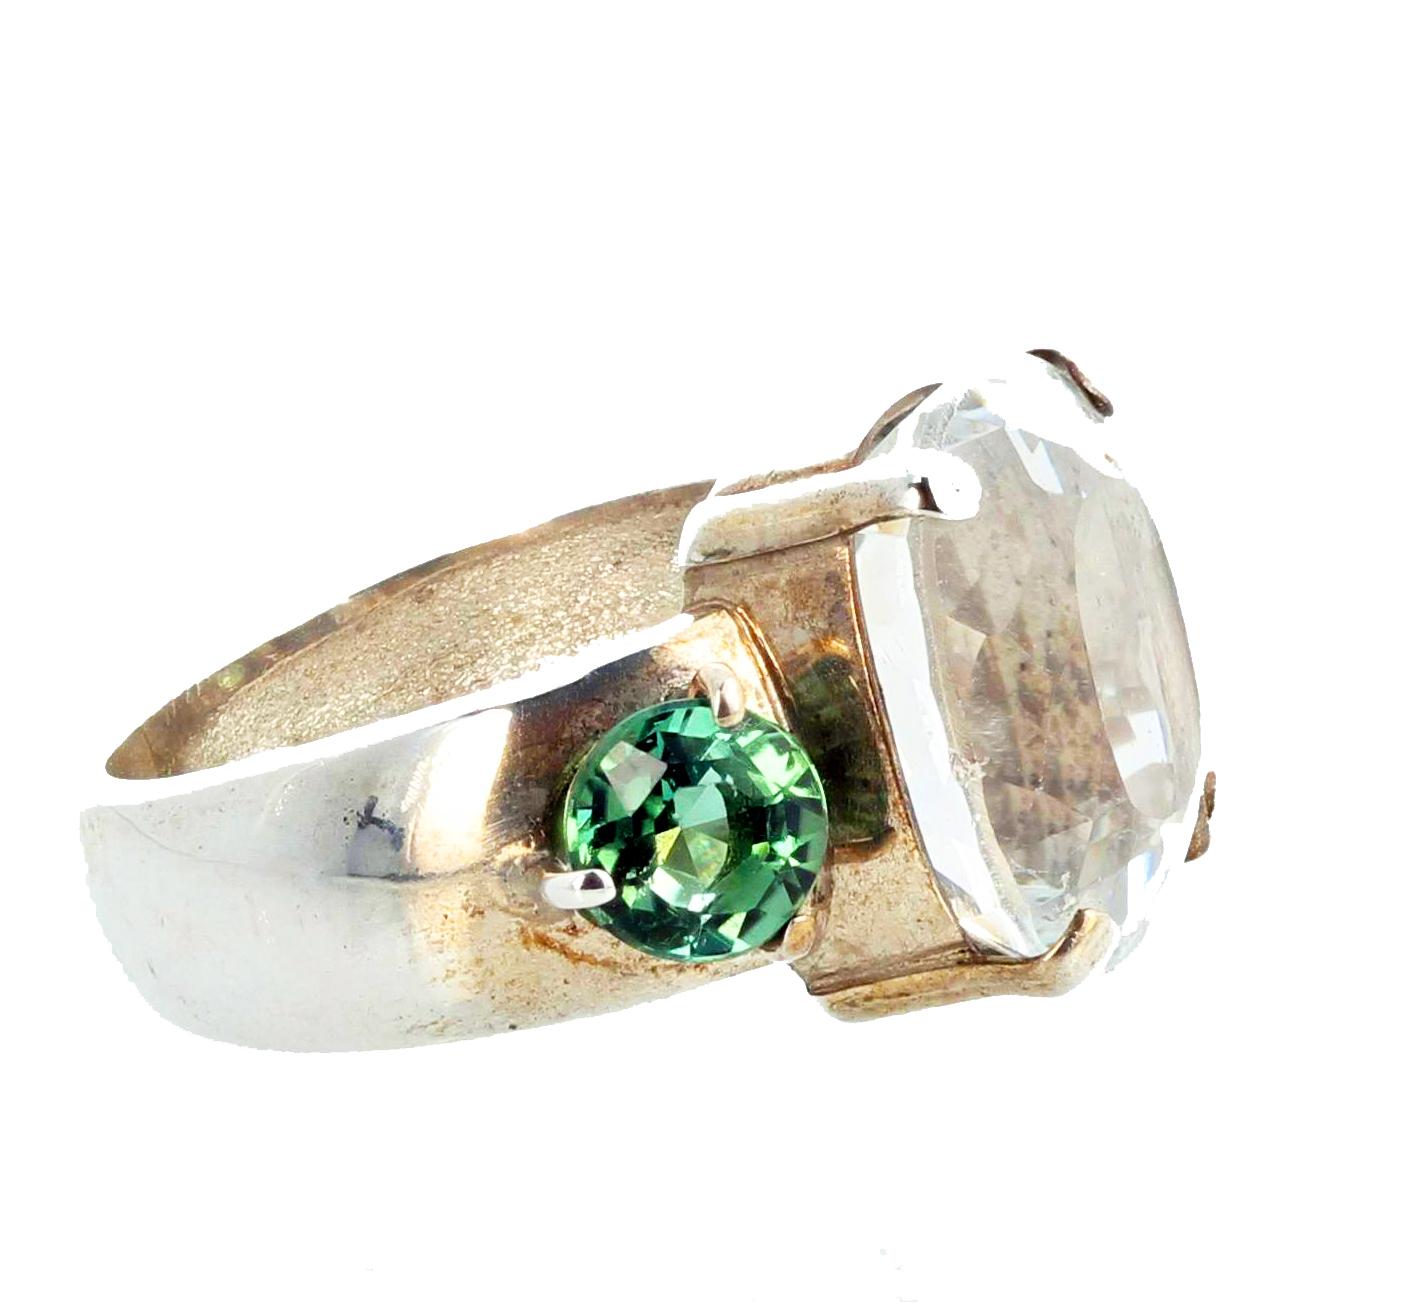 AJD HUGE 11.80 Ct Natural White Topaz & Green Tourmaline Bright Silver Ring In New Condition For Sale In Raleigh, NC